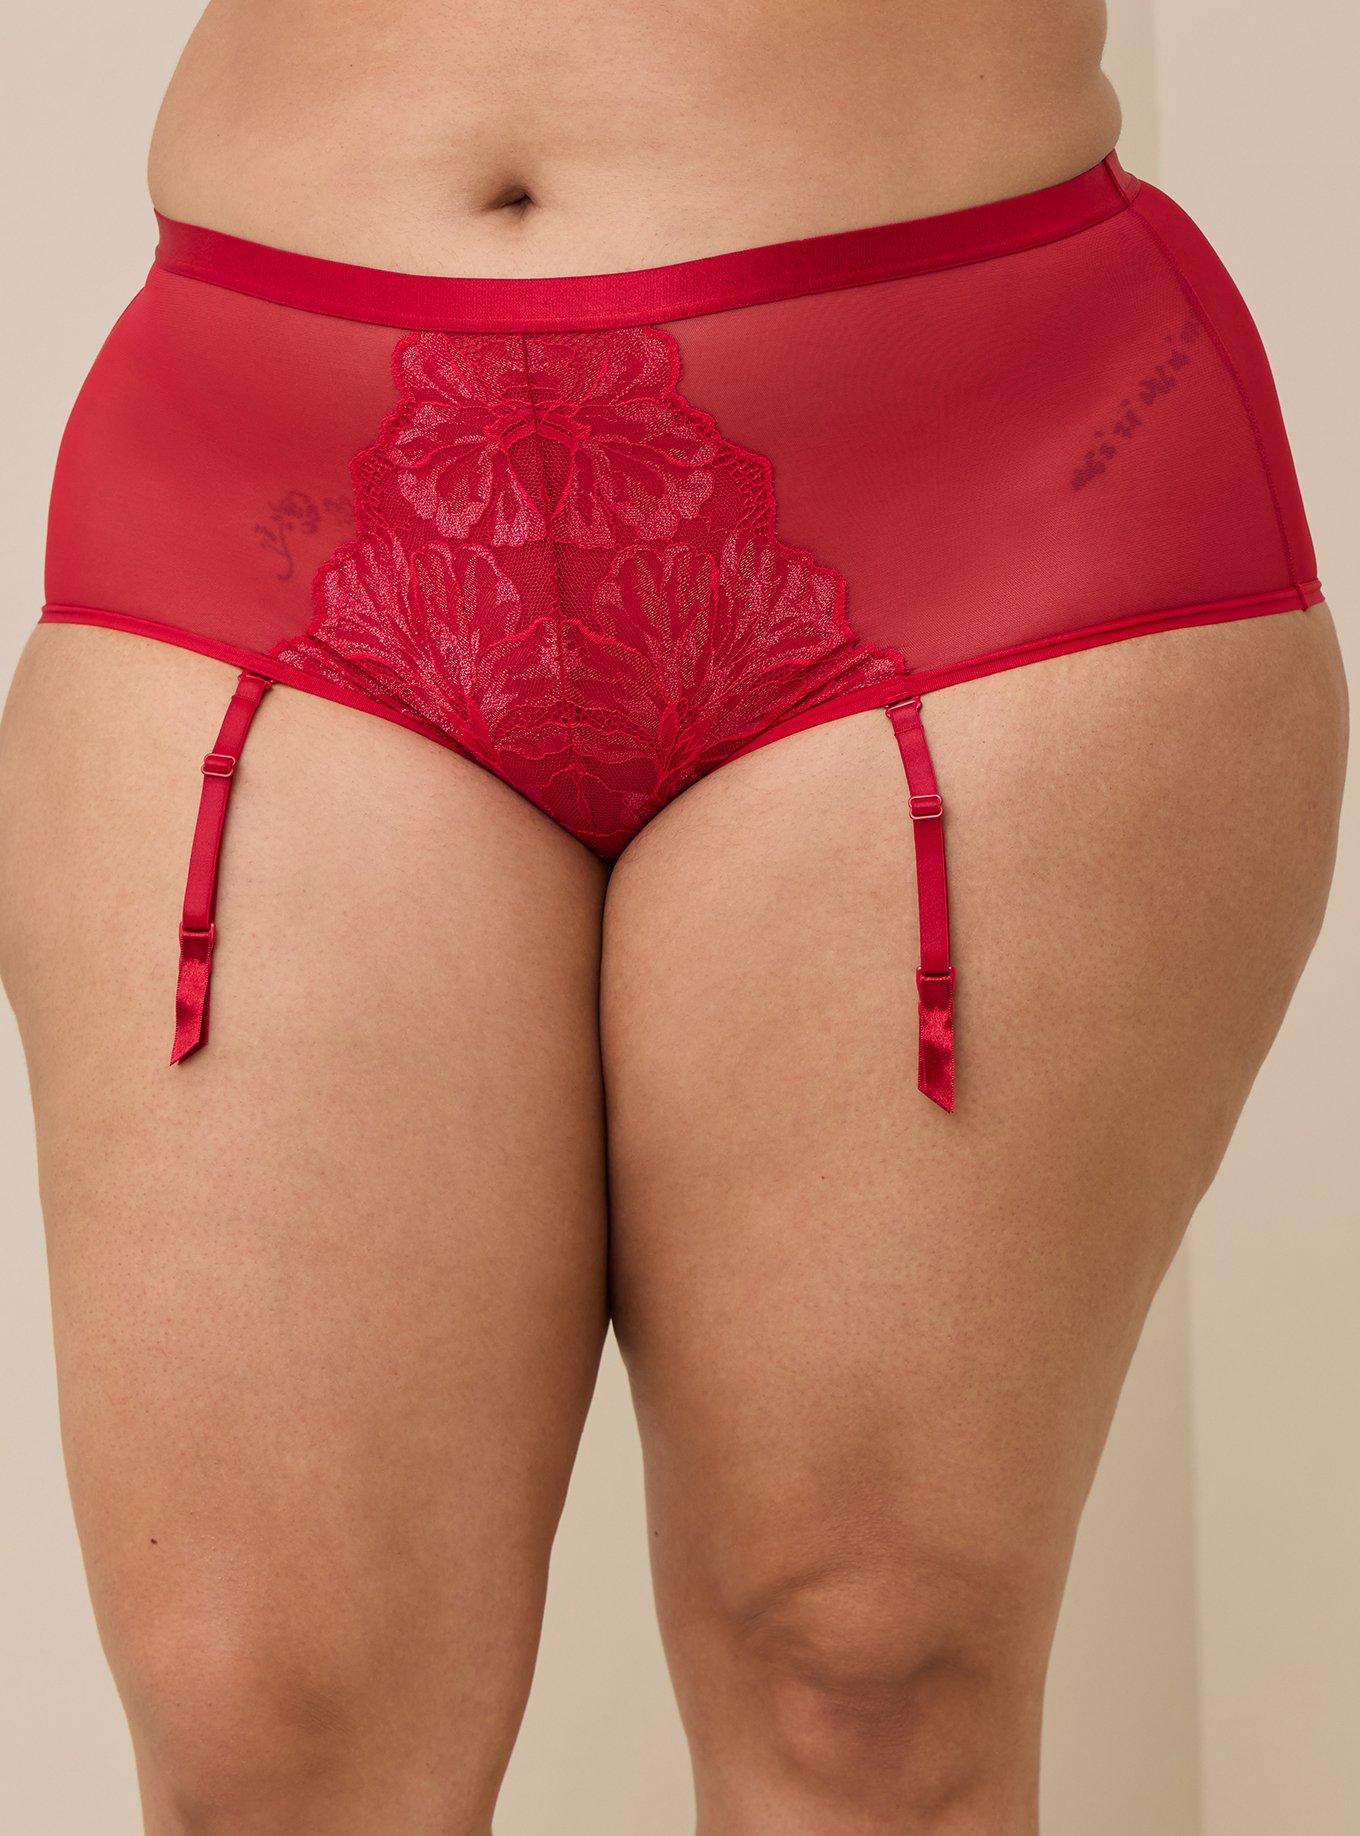 Plus Size 22/24 Cacique Mid Waist Cheeky Garter Panty Black Pink